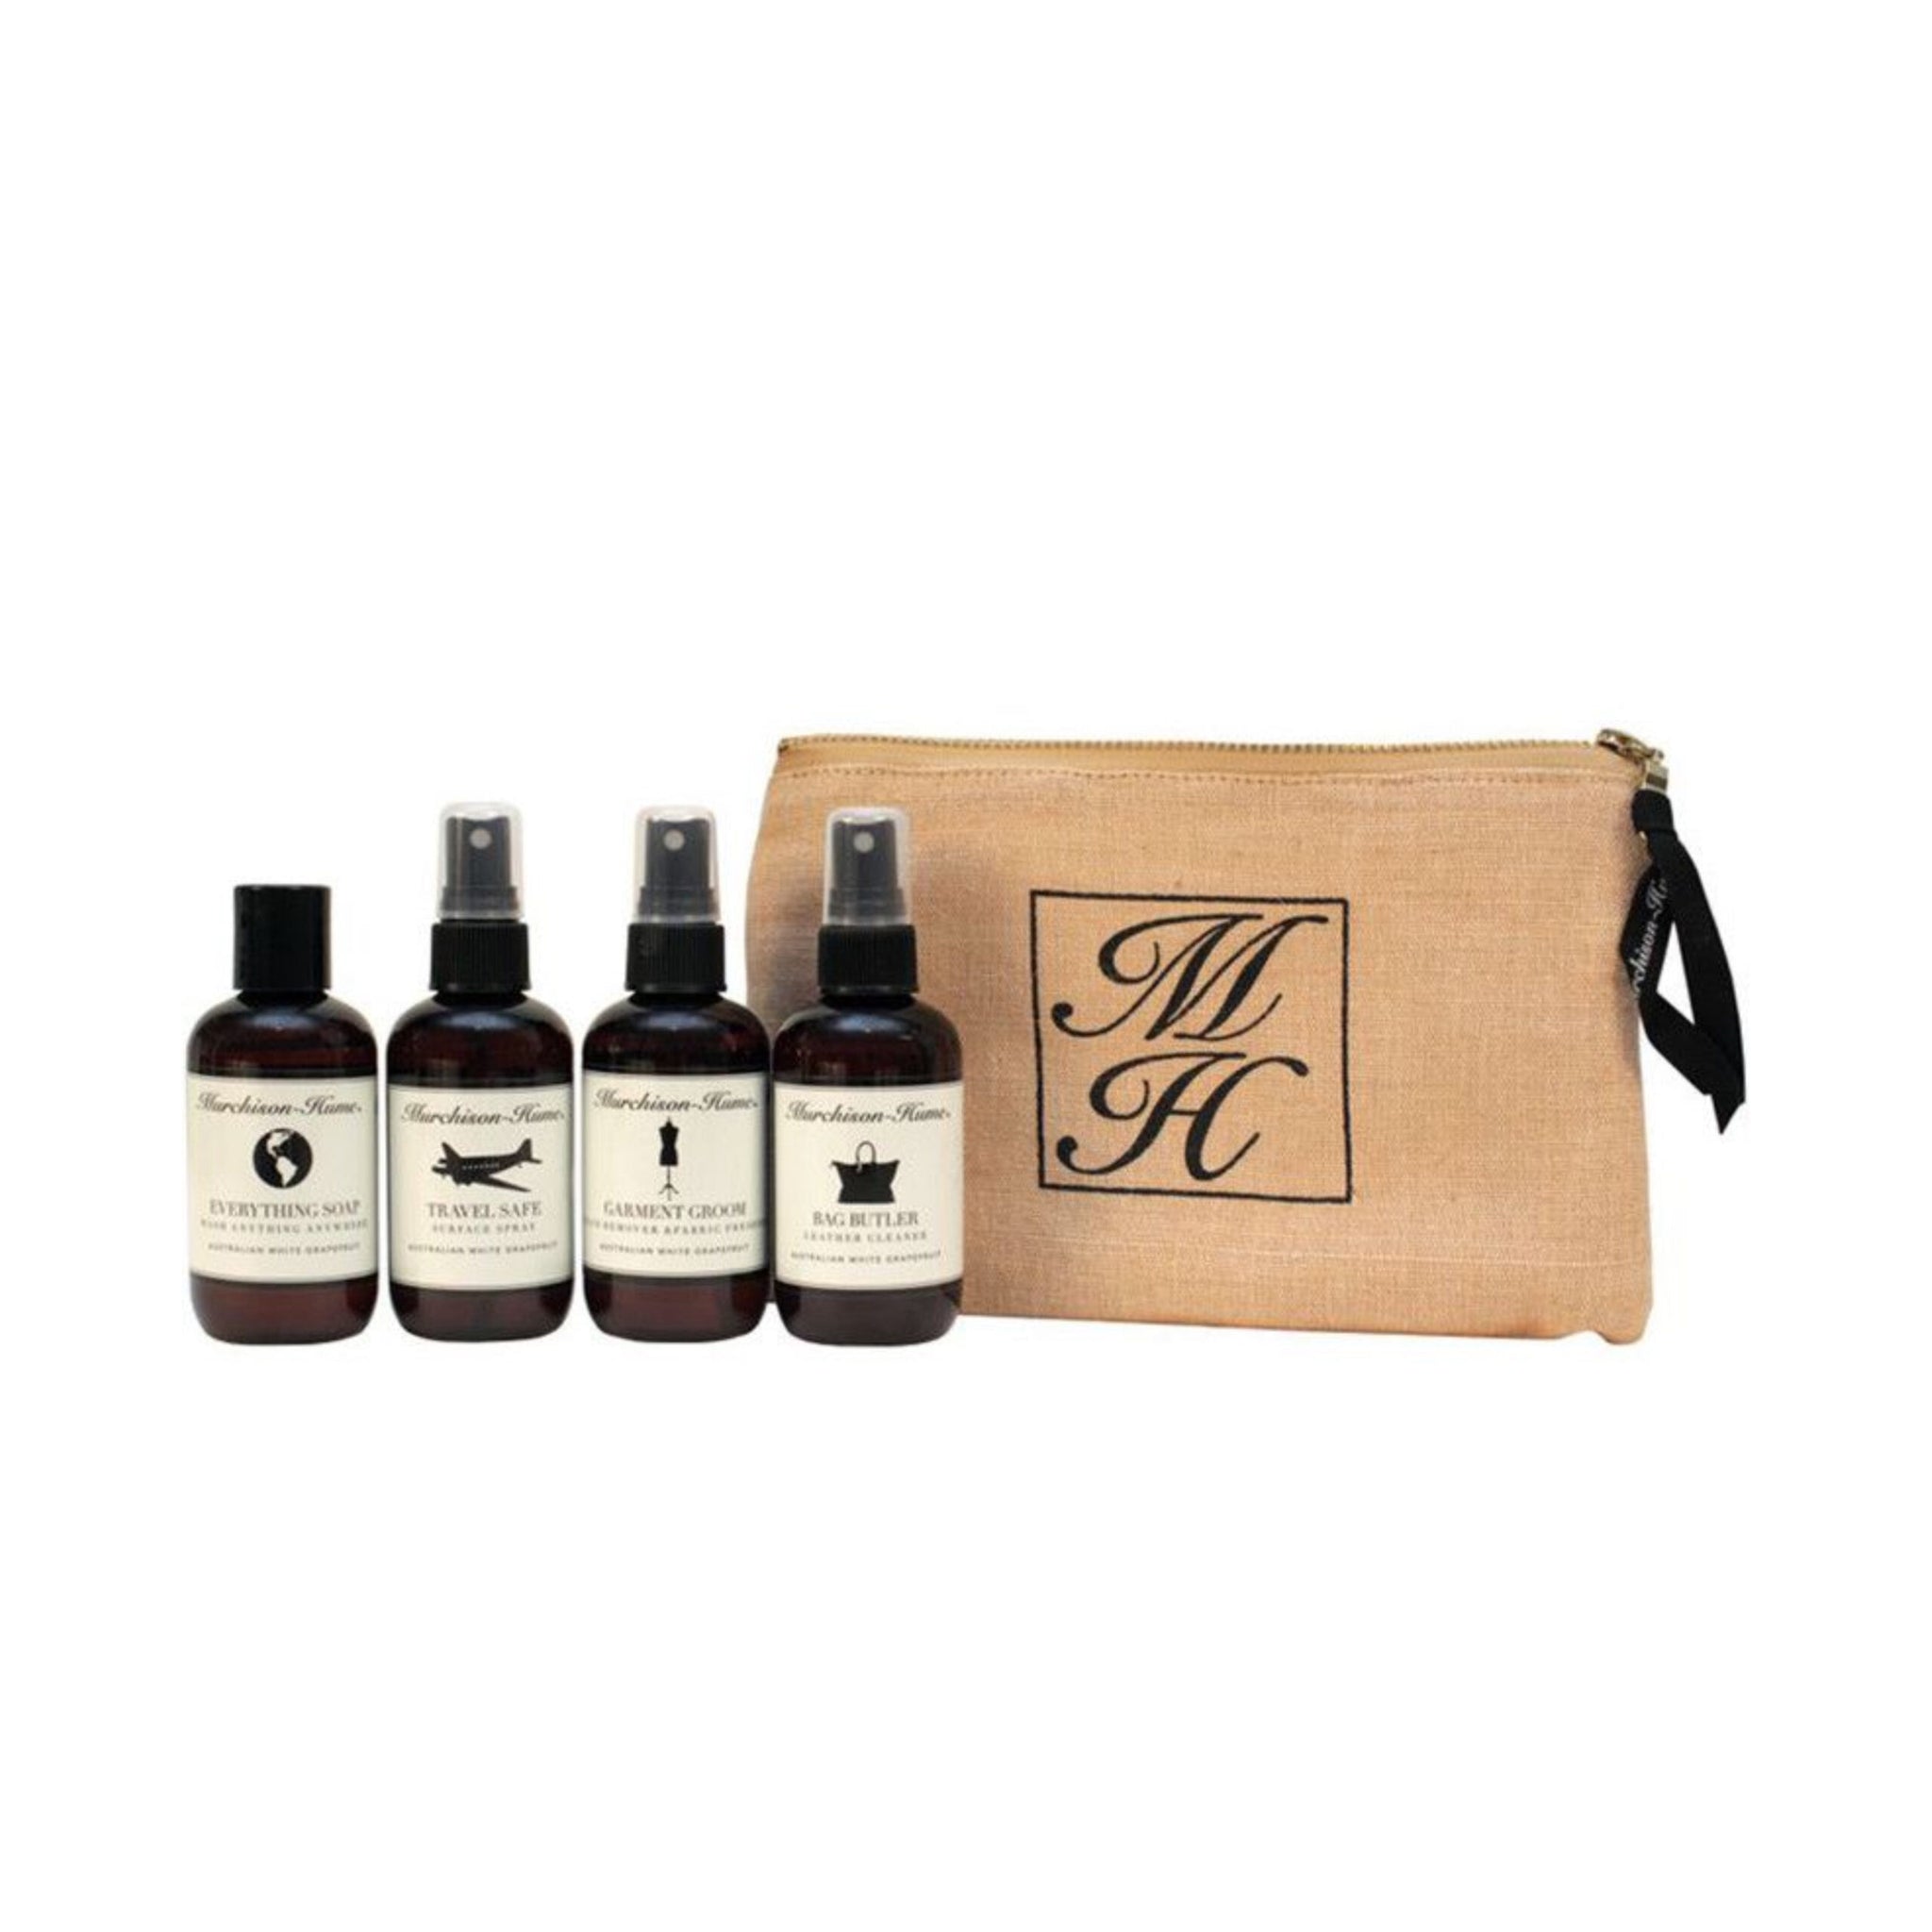 Travel Gift Set by Murchison Hume